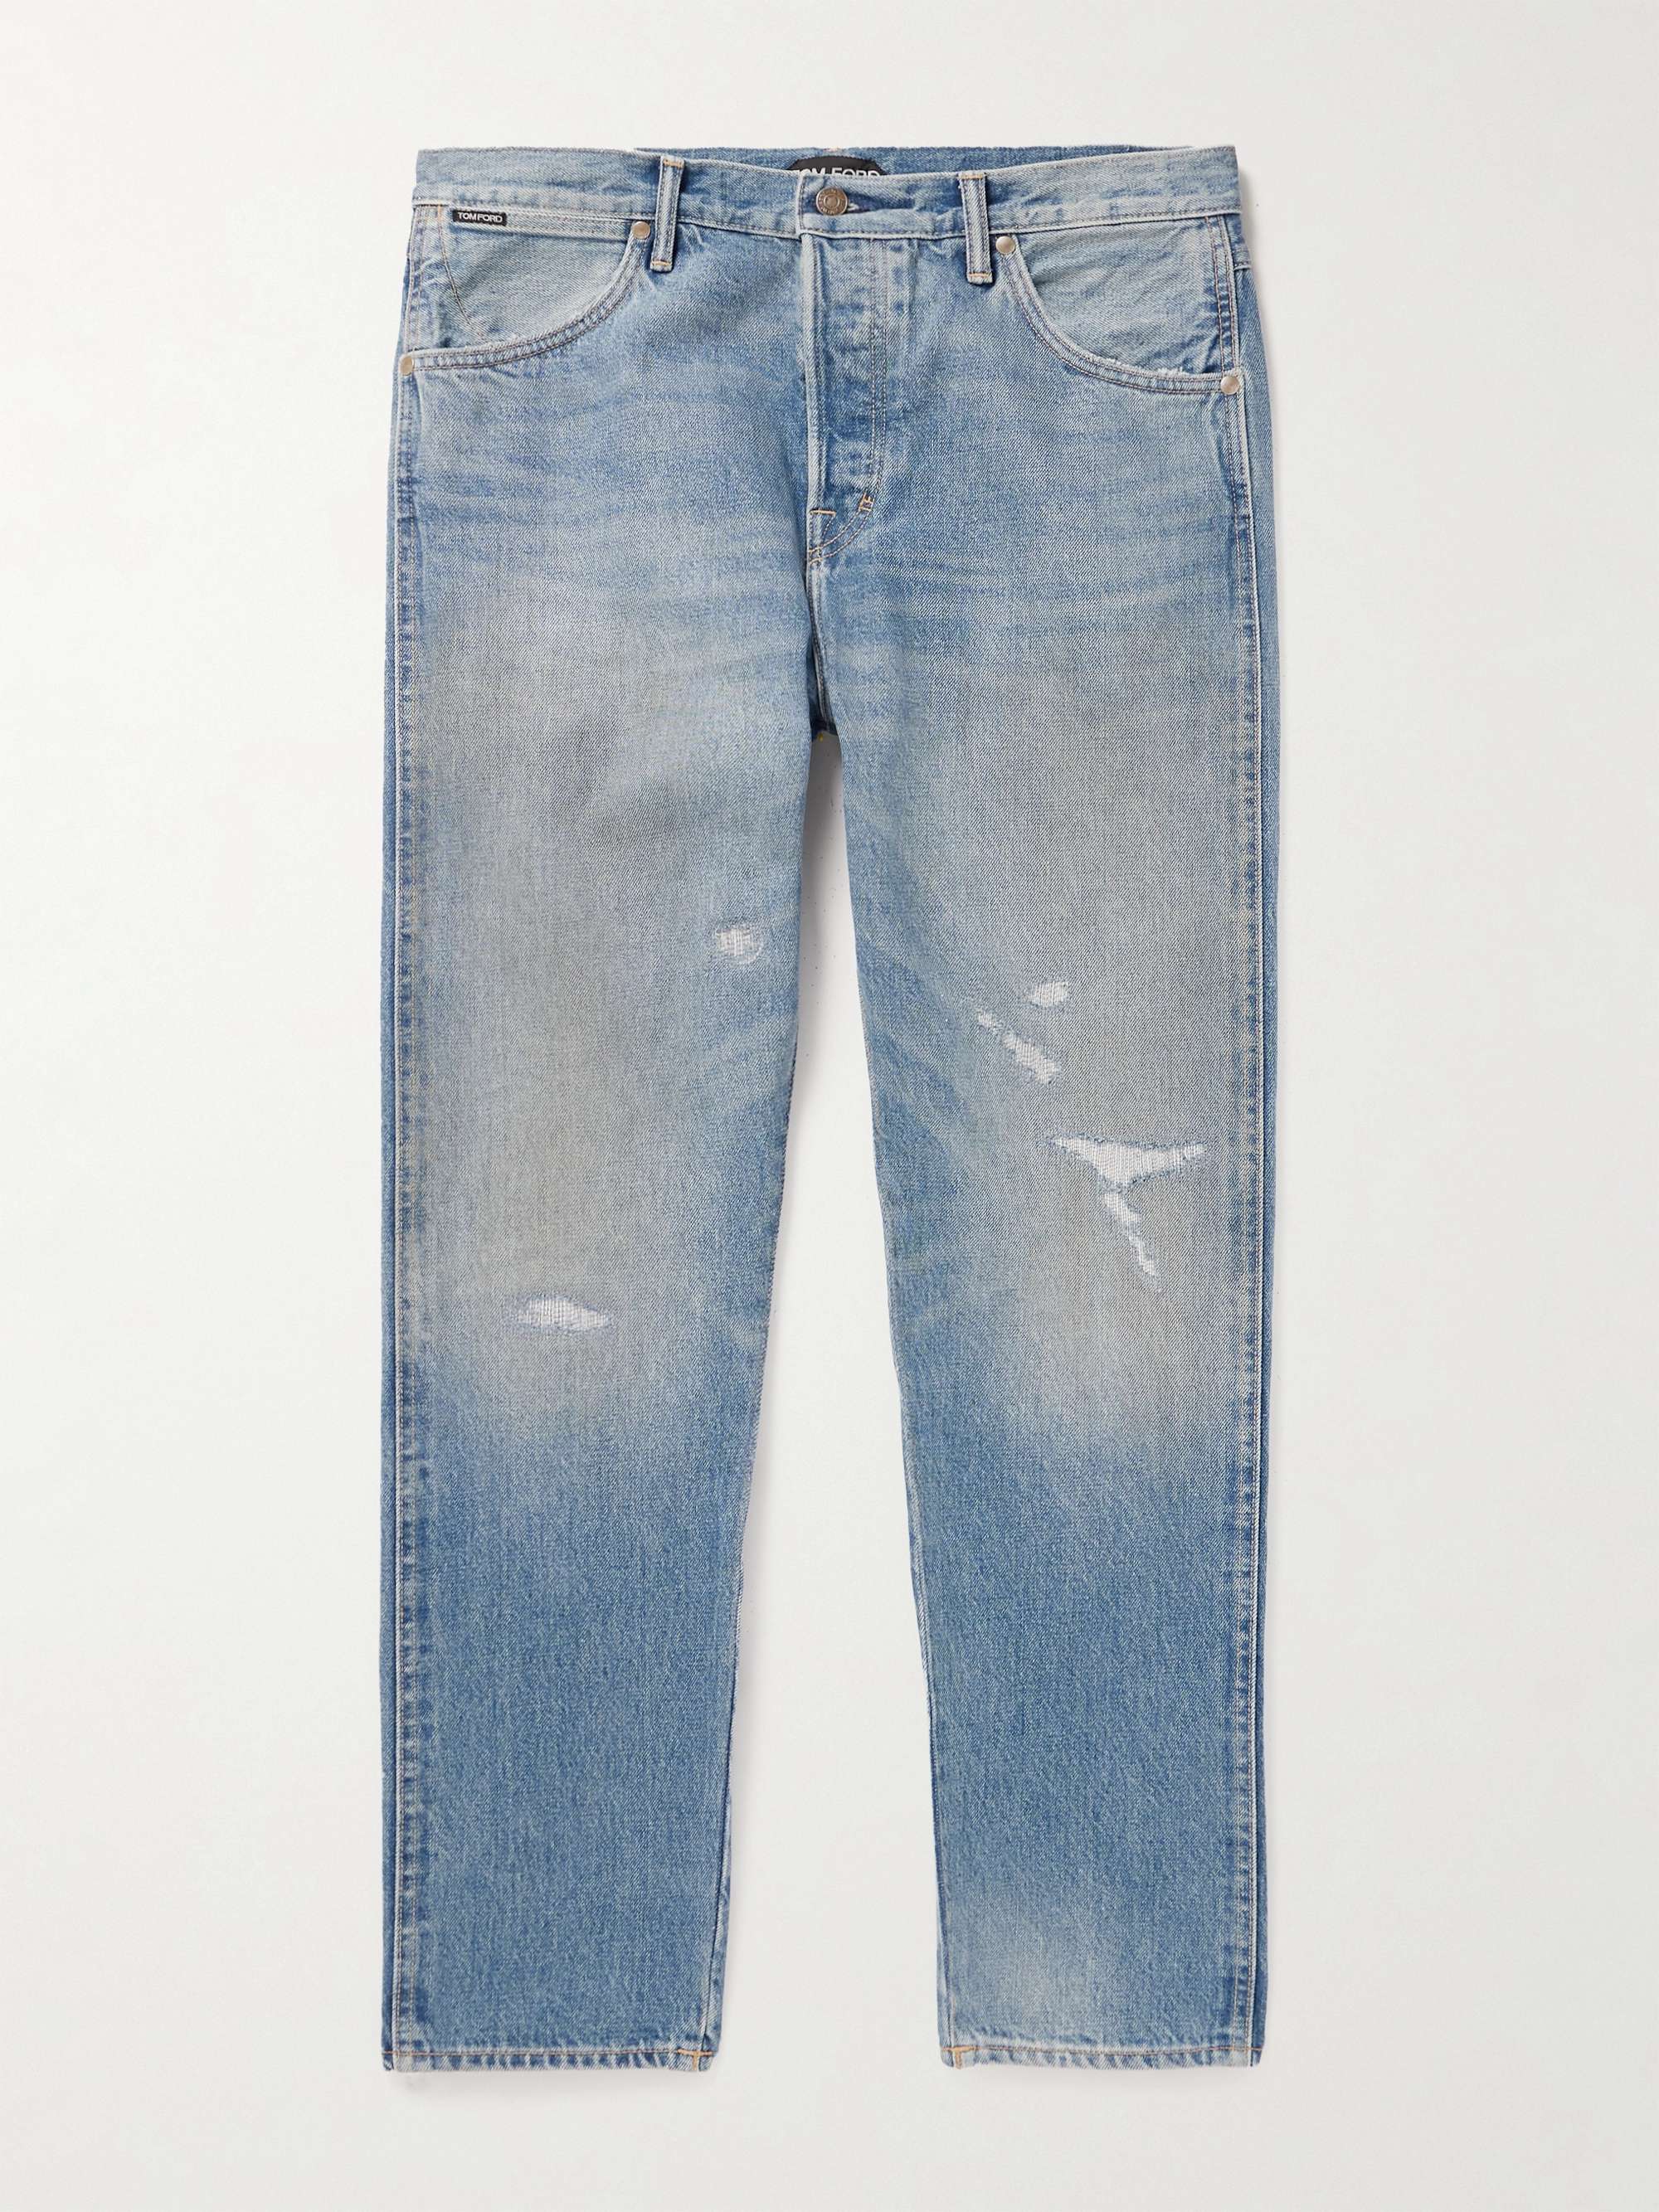 TOM FORD Straight-Leg Distressed Jeans